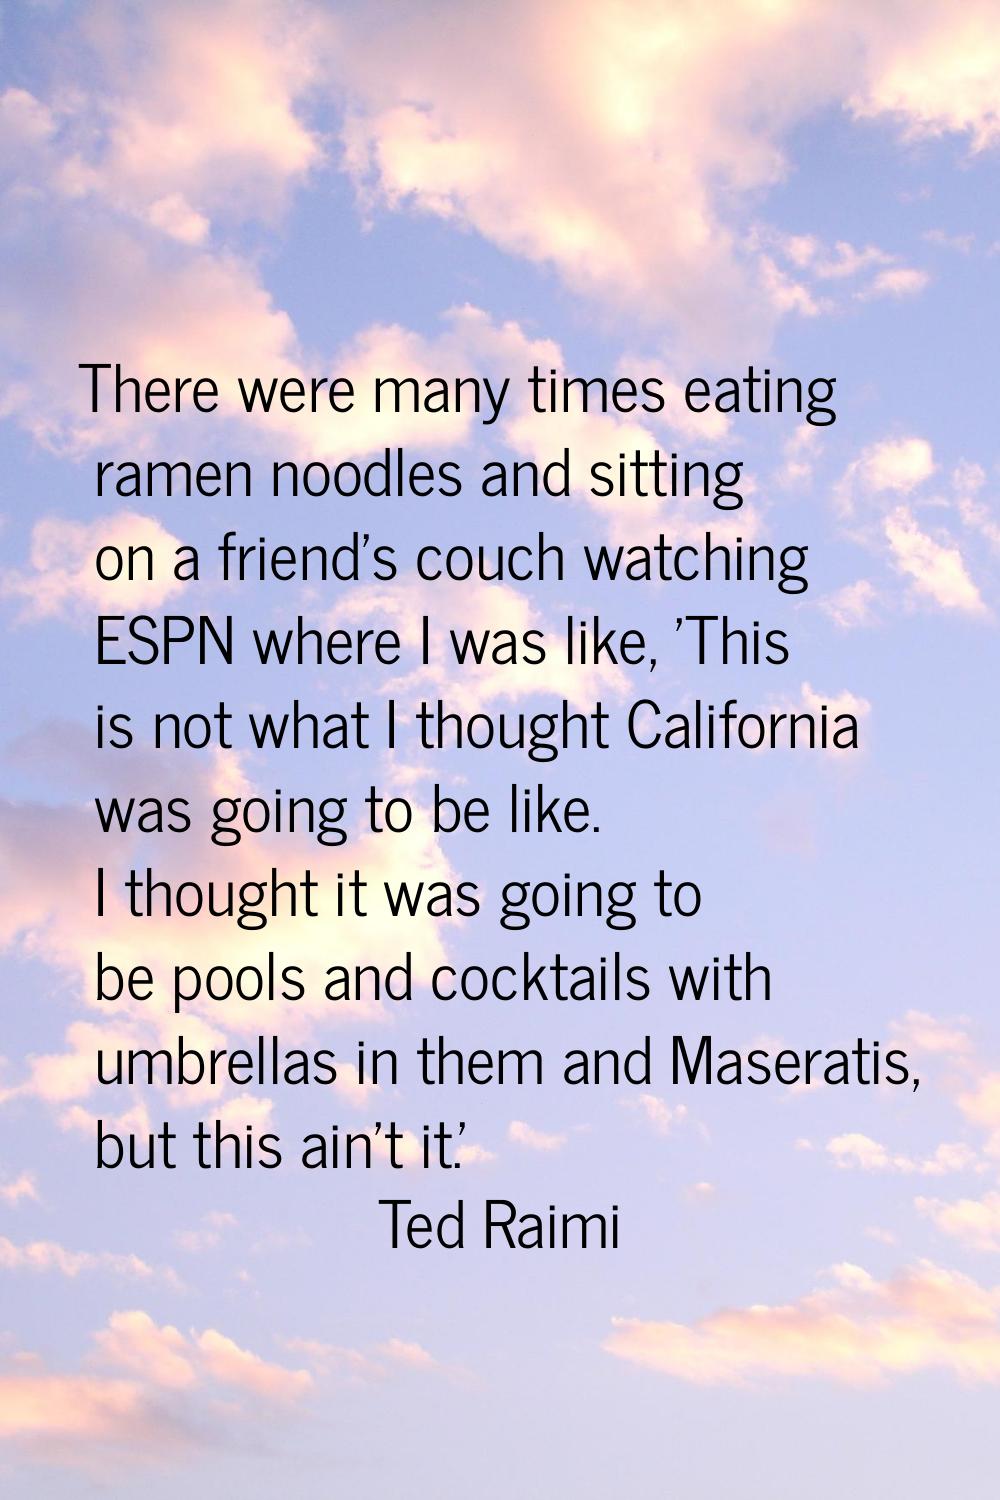 There were many times eating ramen noodles and sitting on a friend's couch watching ESPN where I wa